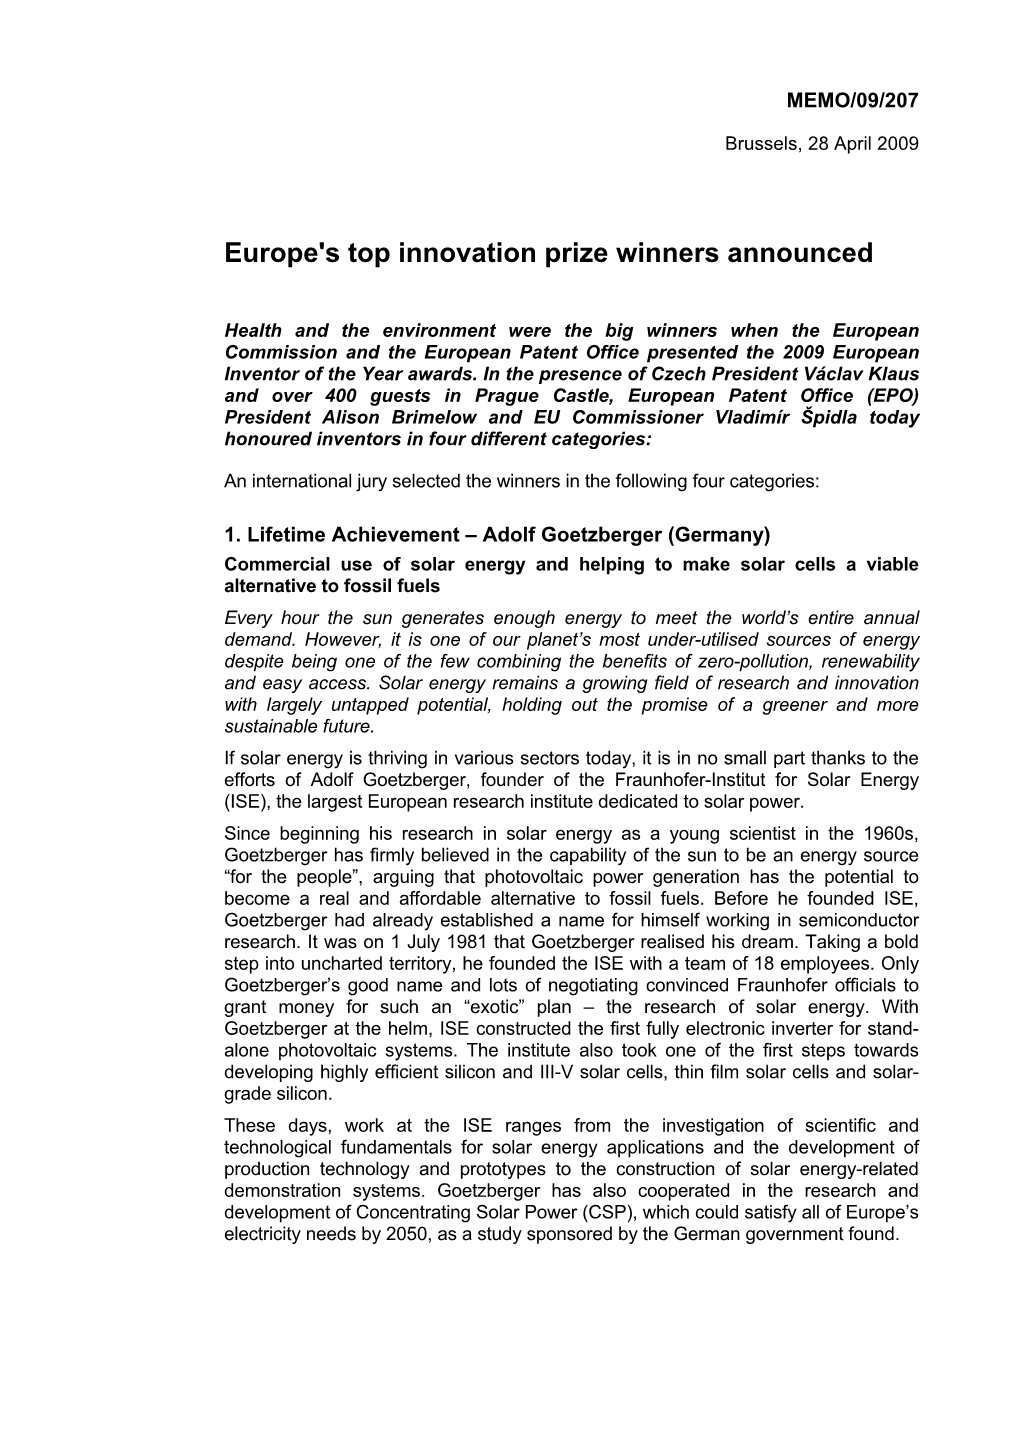 Europe's Top Innovation Prize Winners Announced